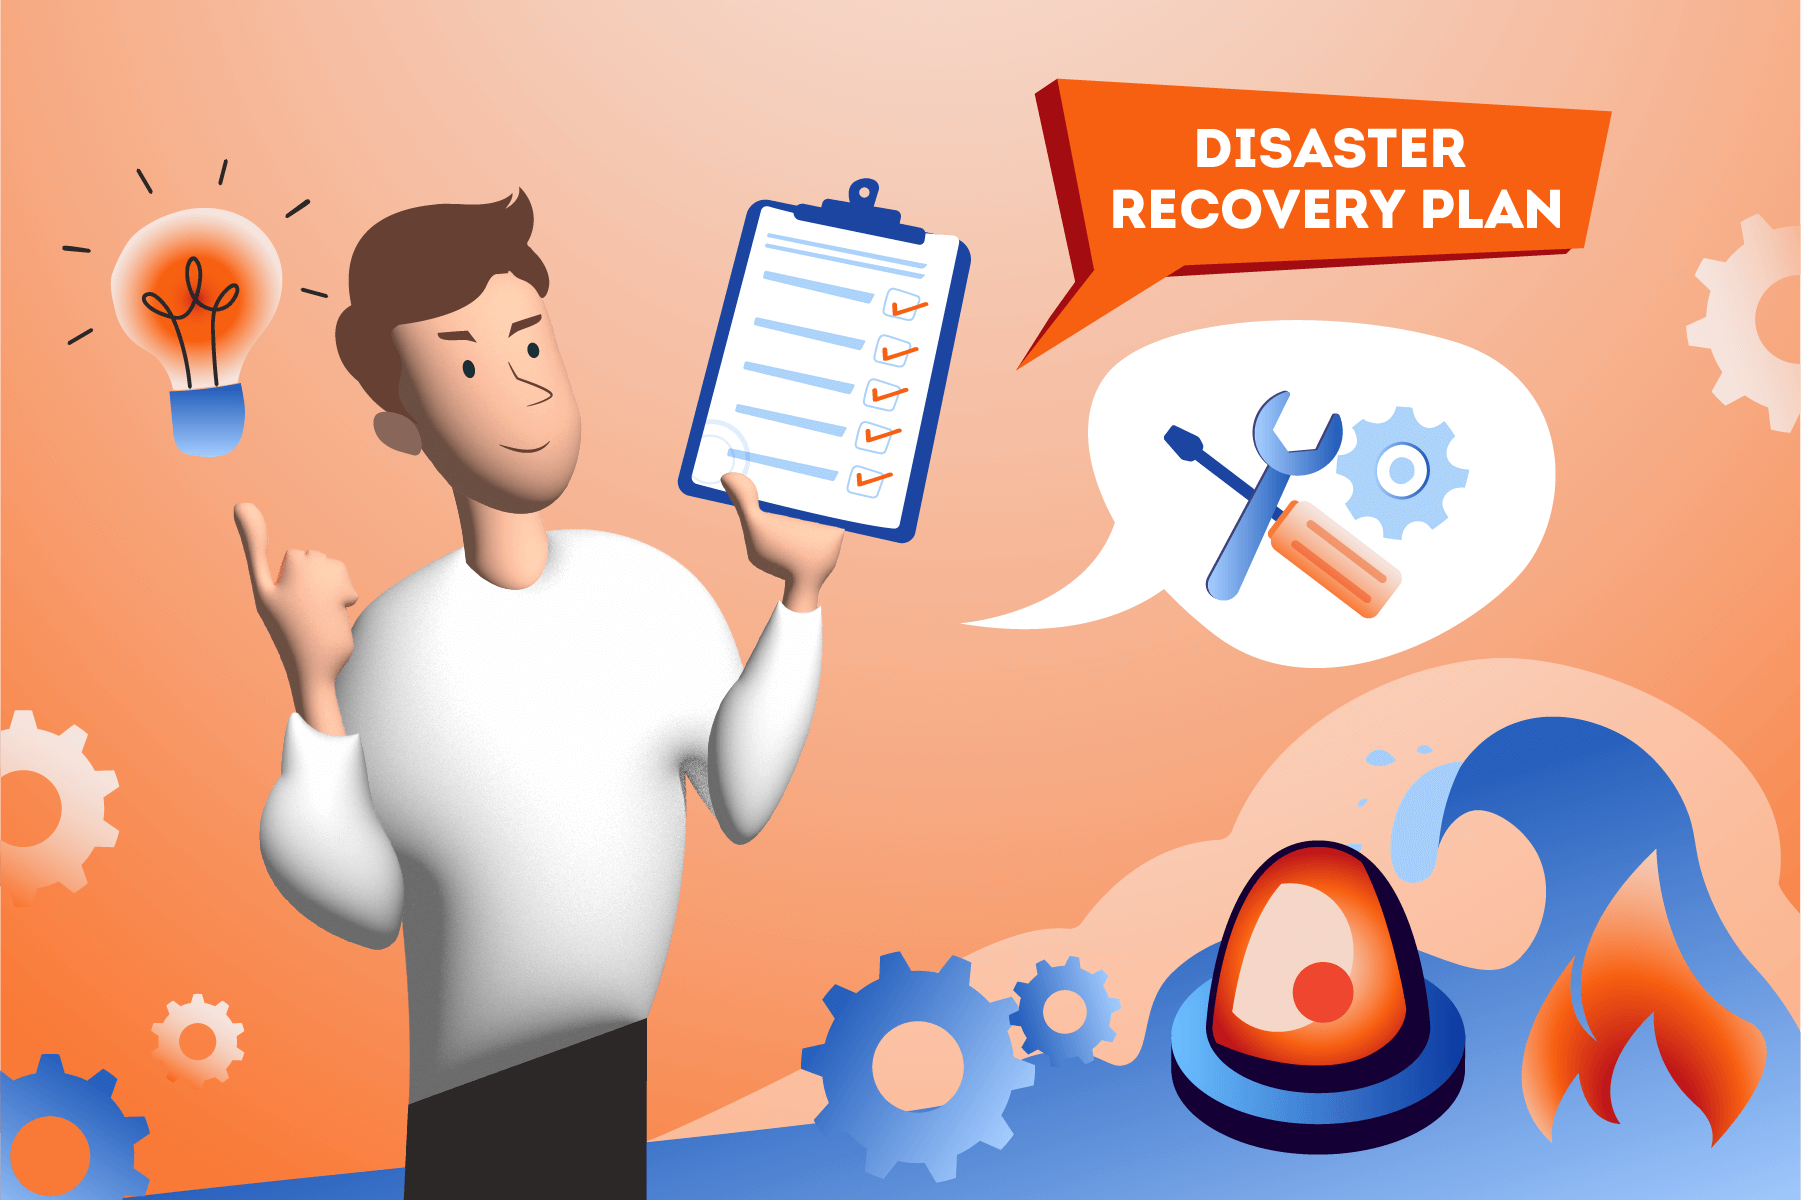 Disaster Recovery Plan braucht jeder